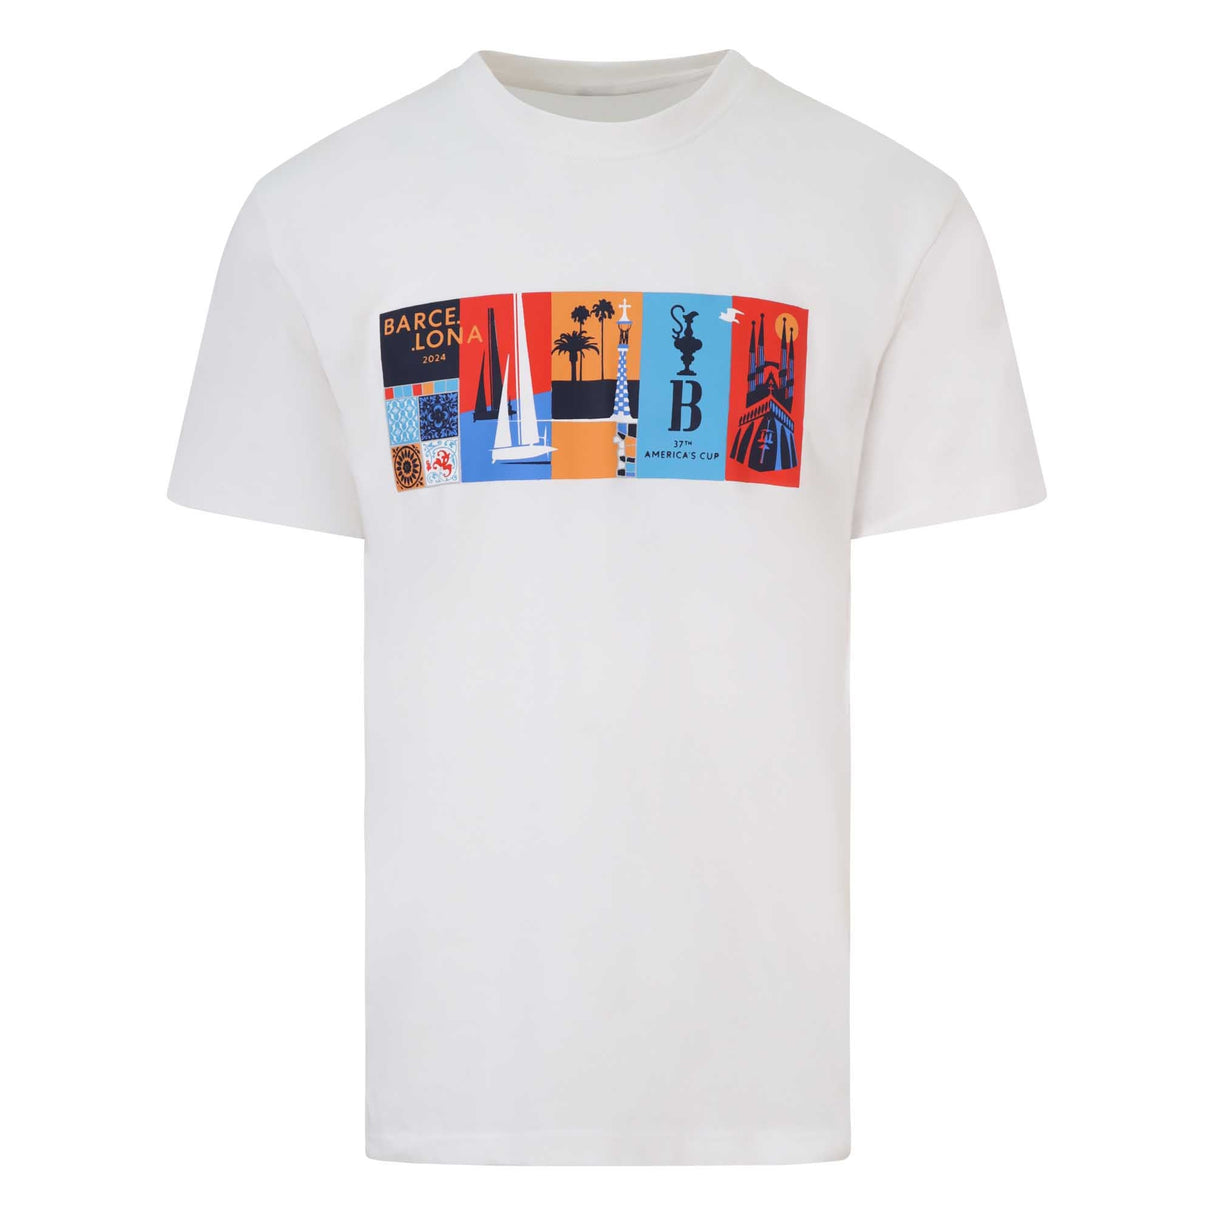 37th America's Cup Iconic T-Shirt